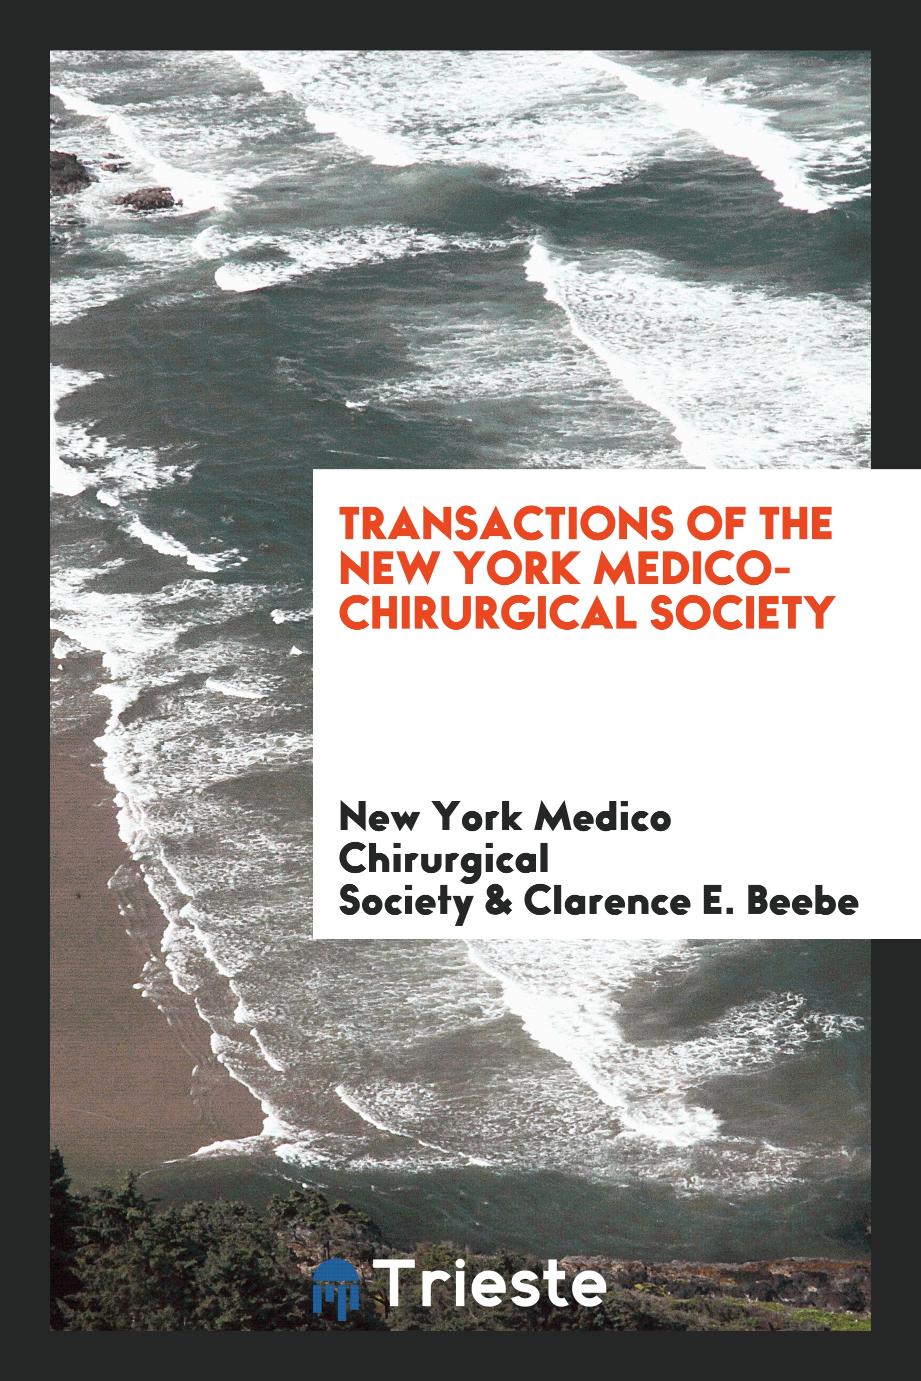 Transactions of the New York Medico-Chirurgical Society